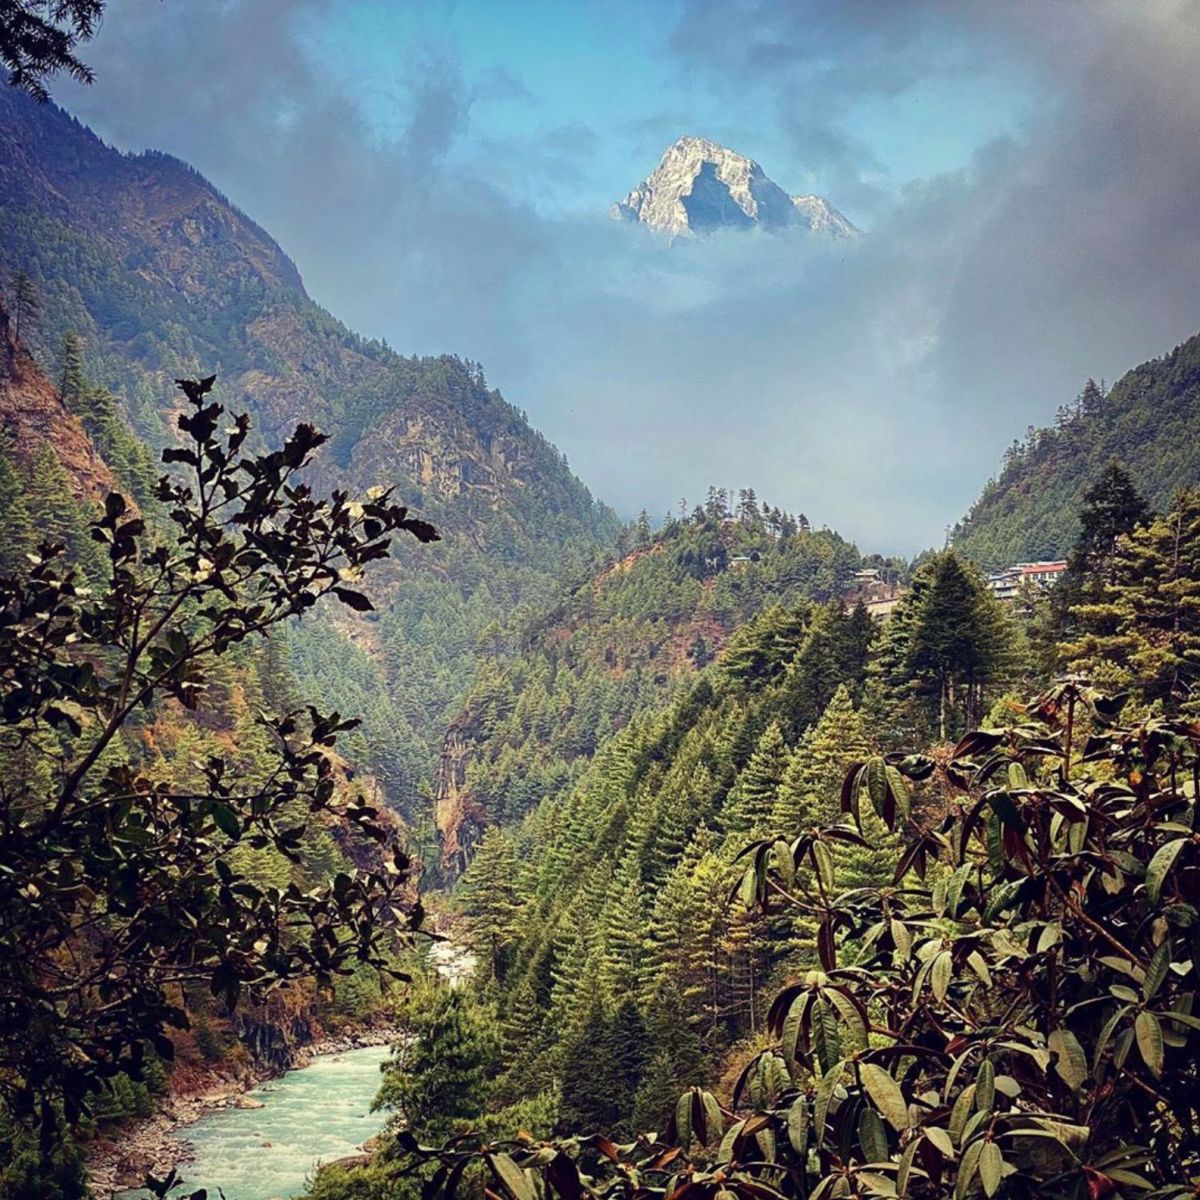 Annapurna mountain and valley